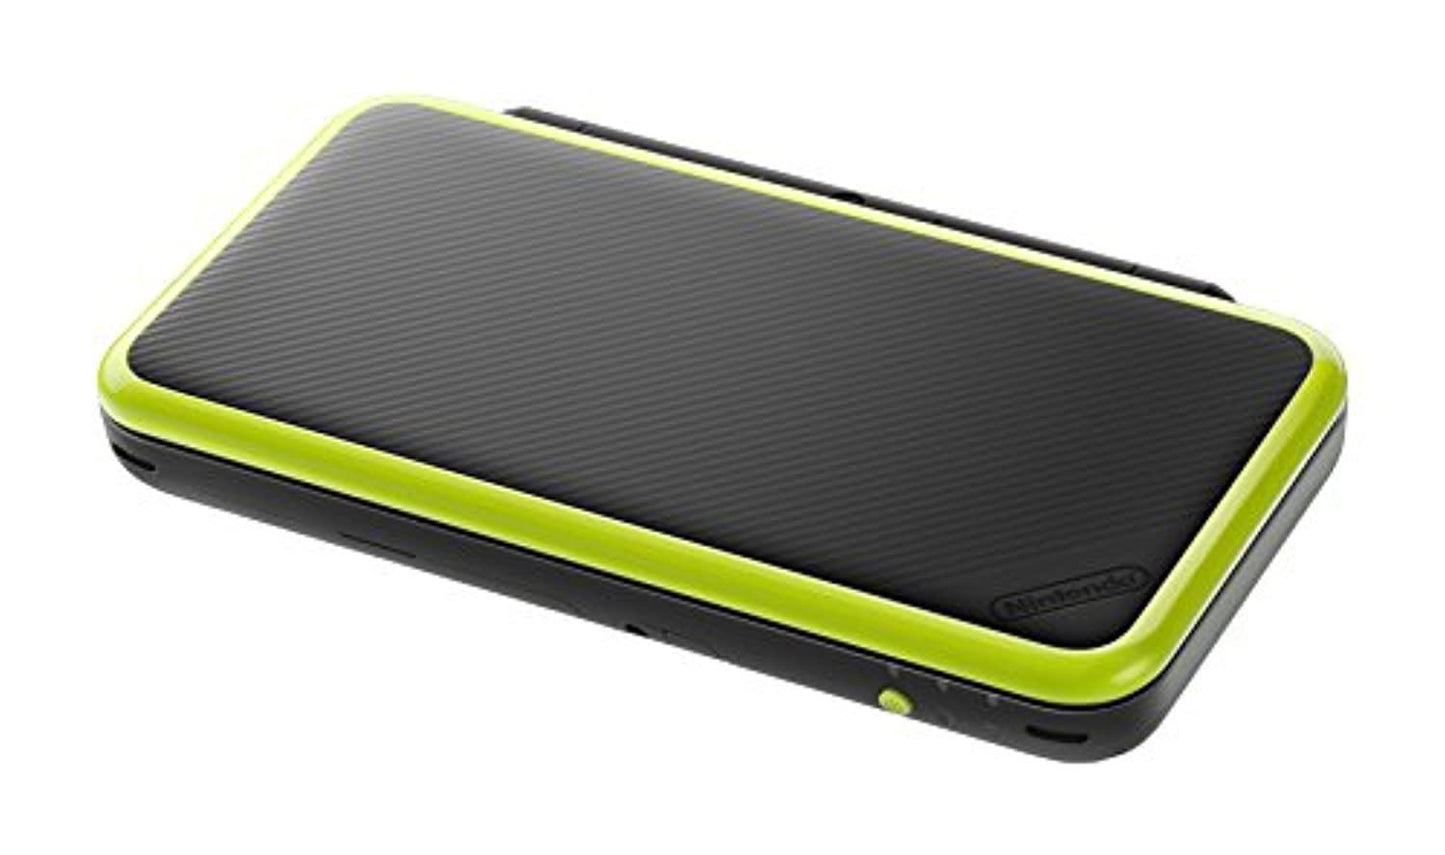 New Nintendo 2DS XL Console - Black/Lime Green (USED) - Offer Games